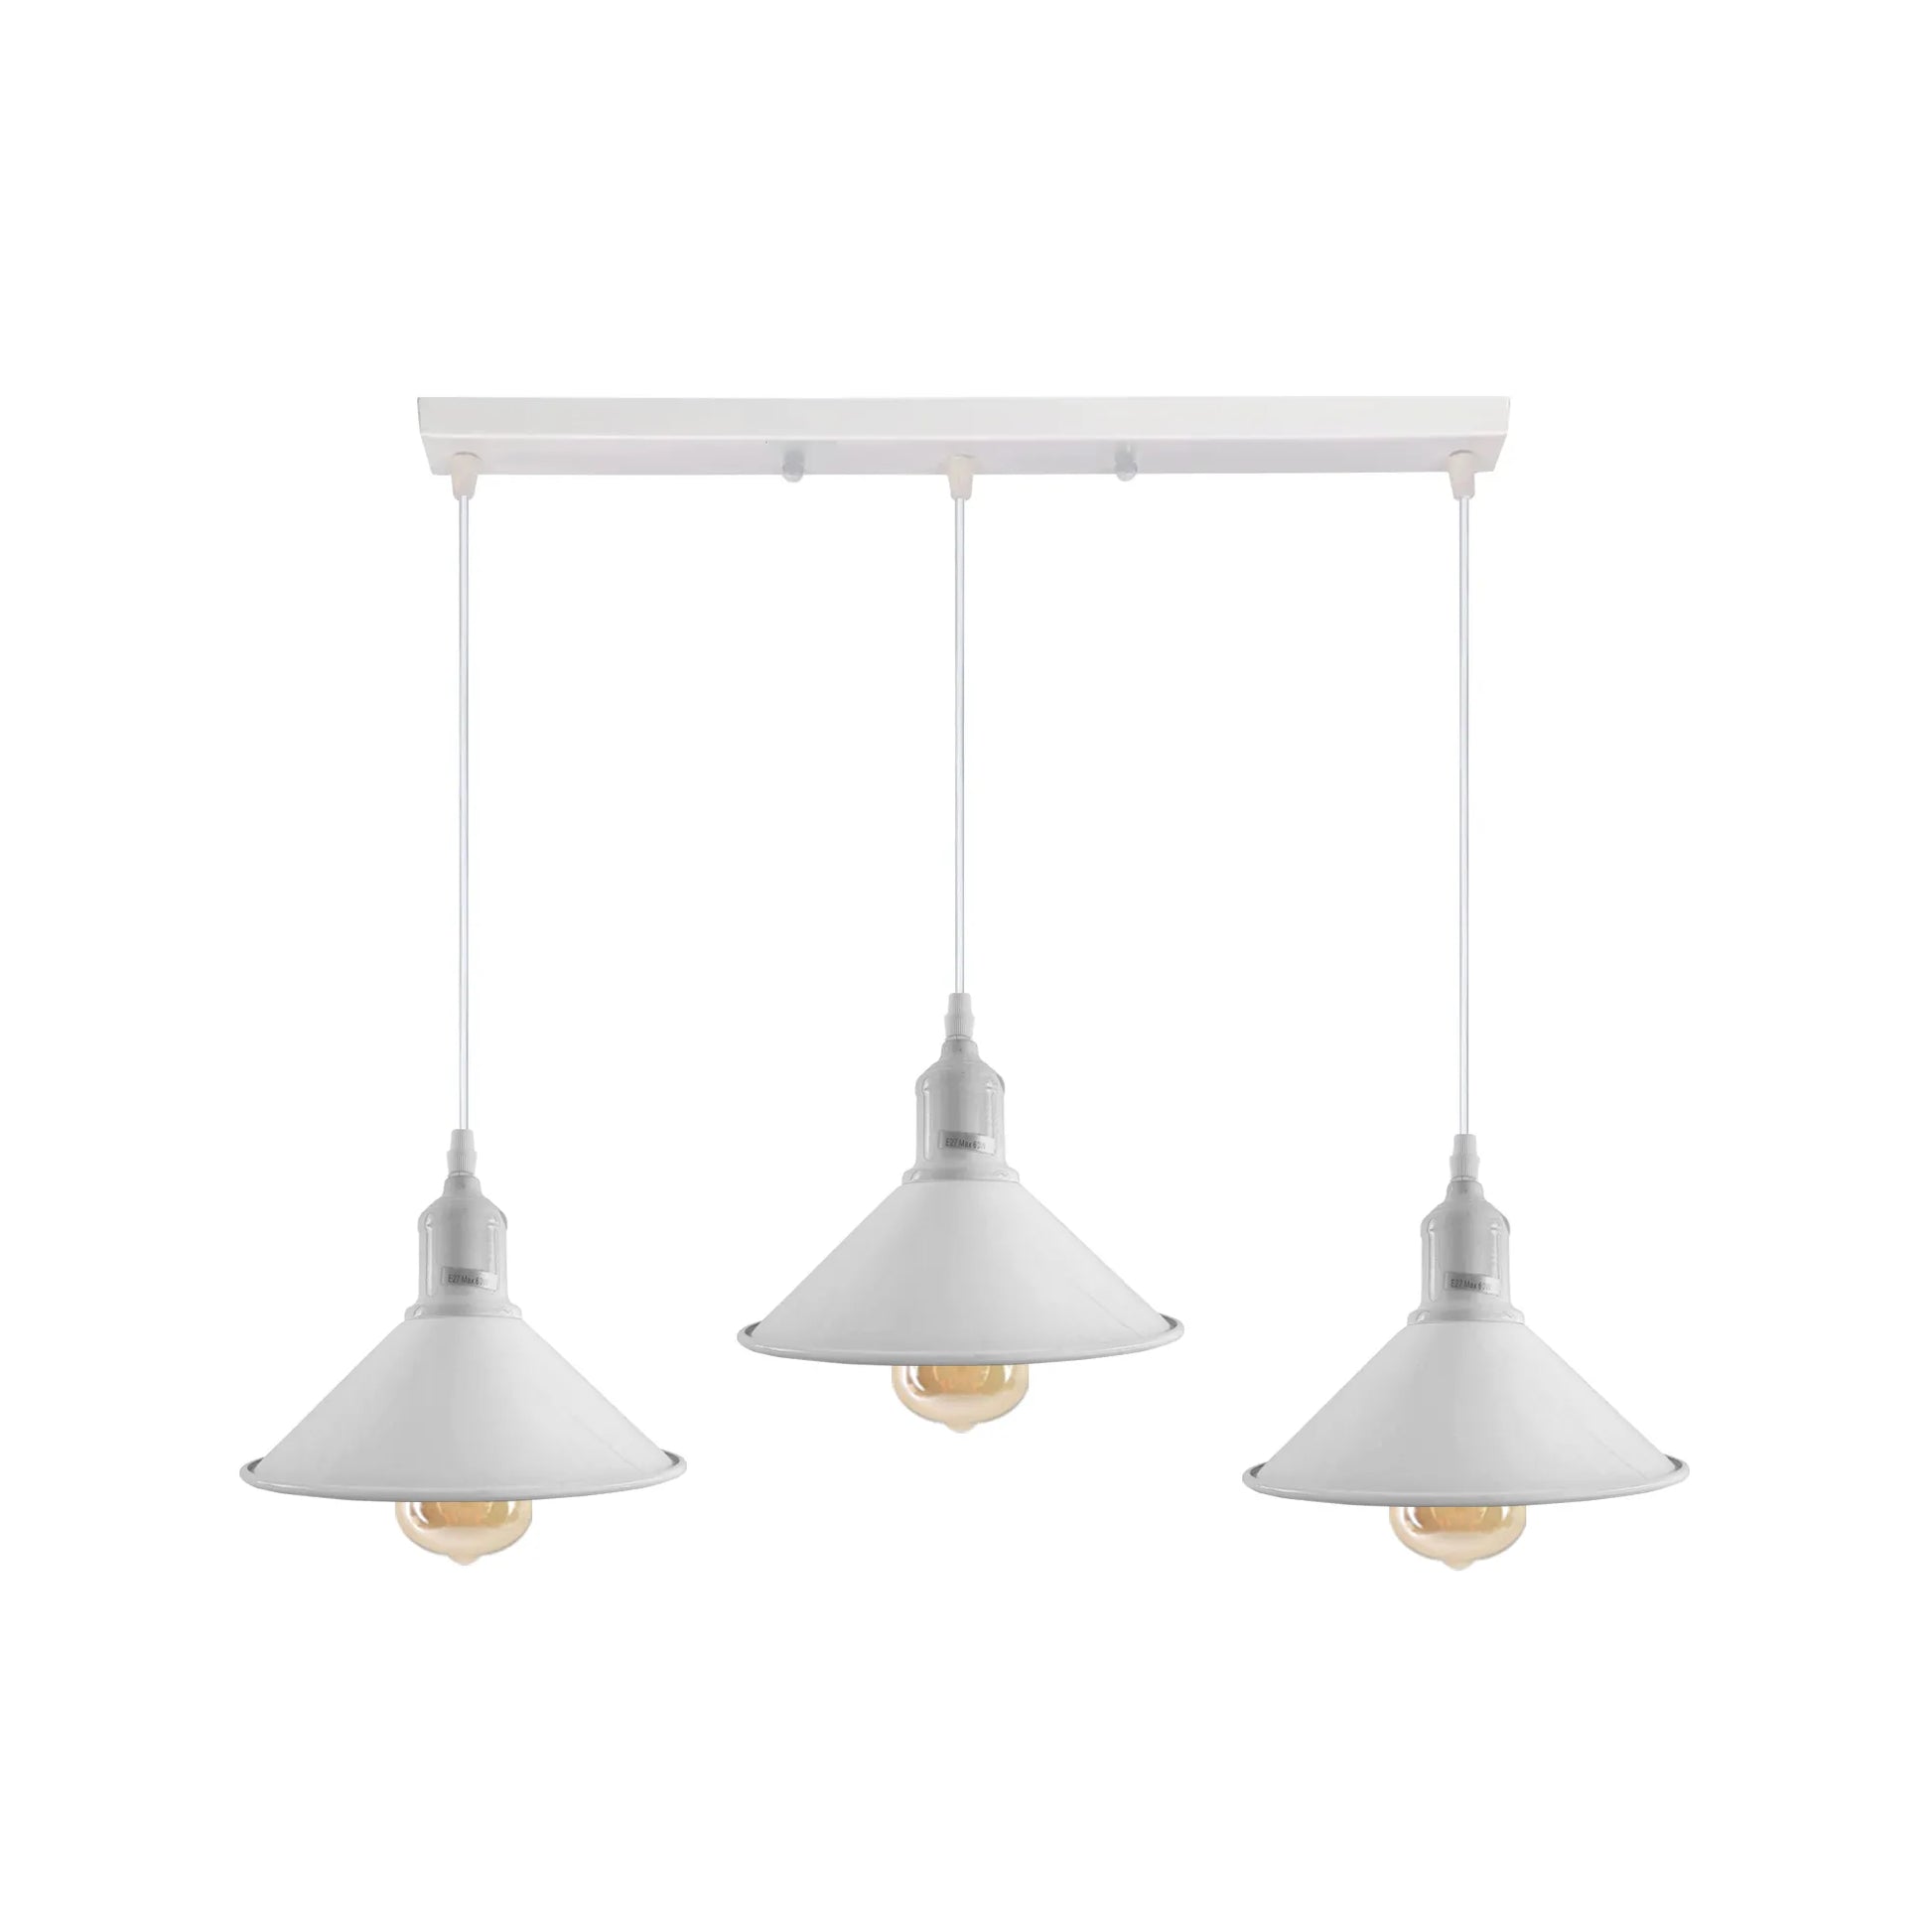 3 Way Industrial Vintage Hanging Pendent Ceiling Light Fittings